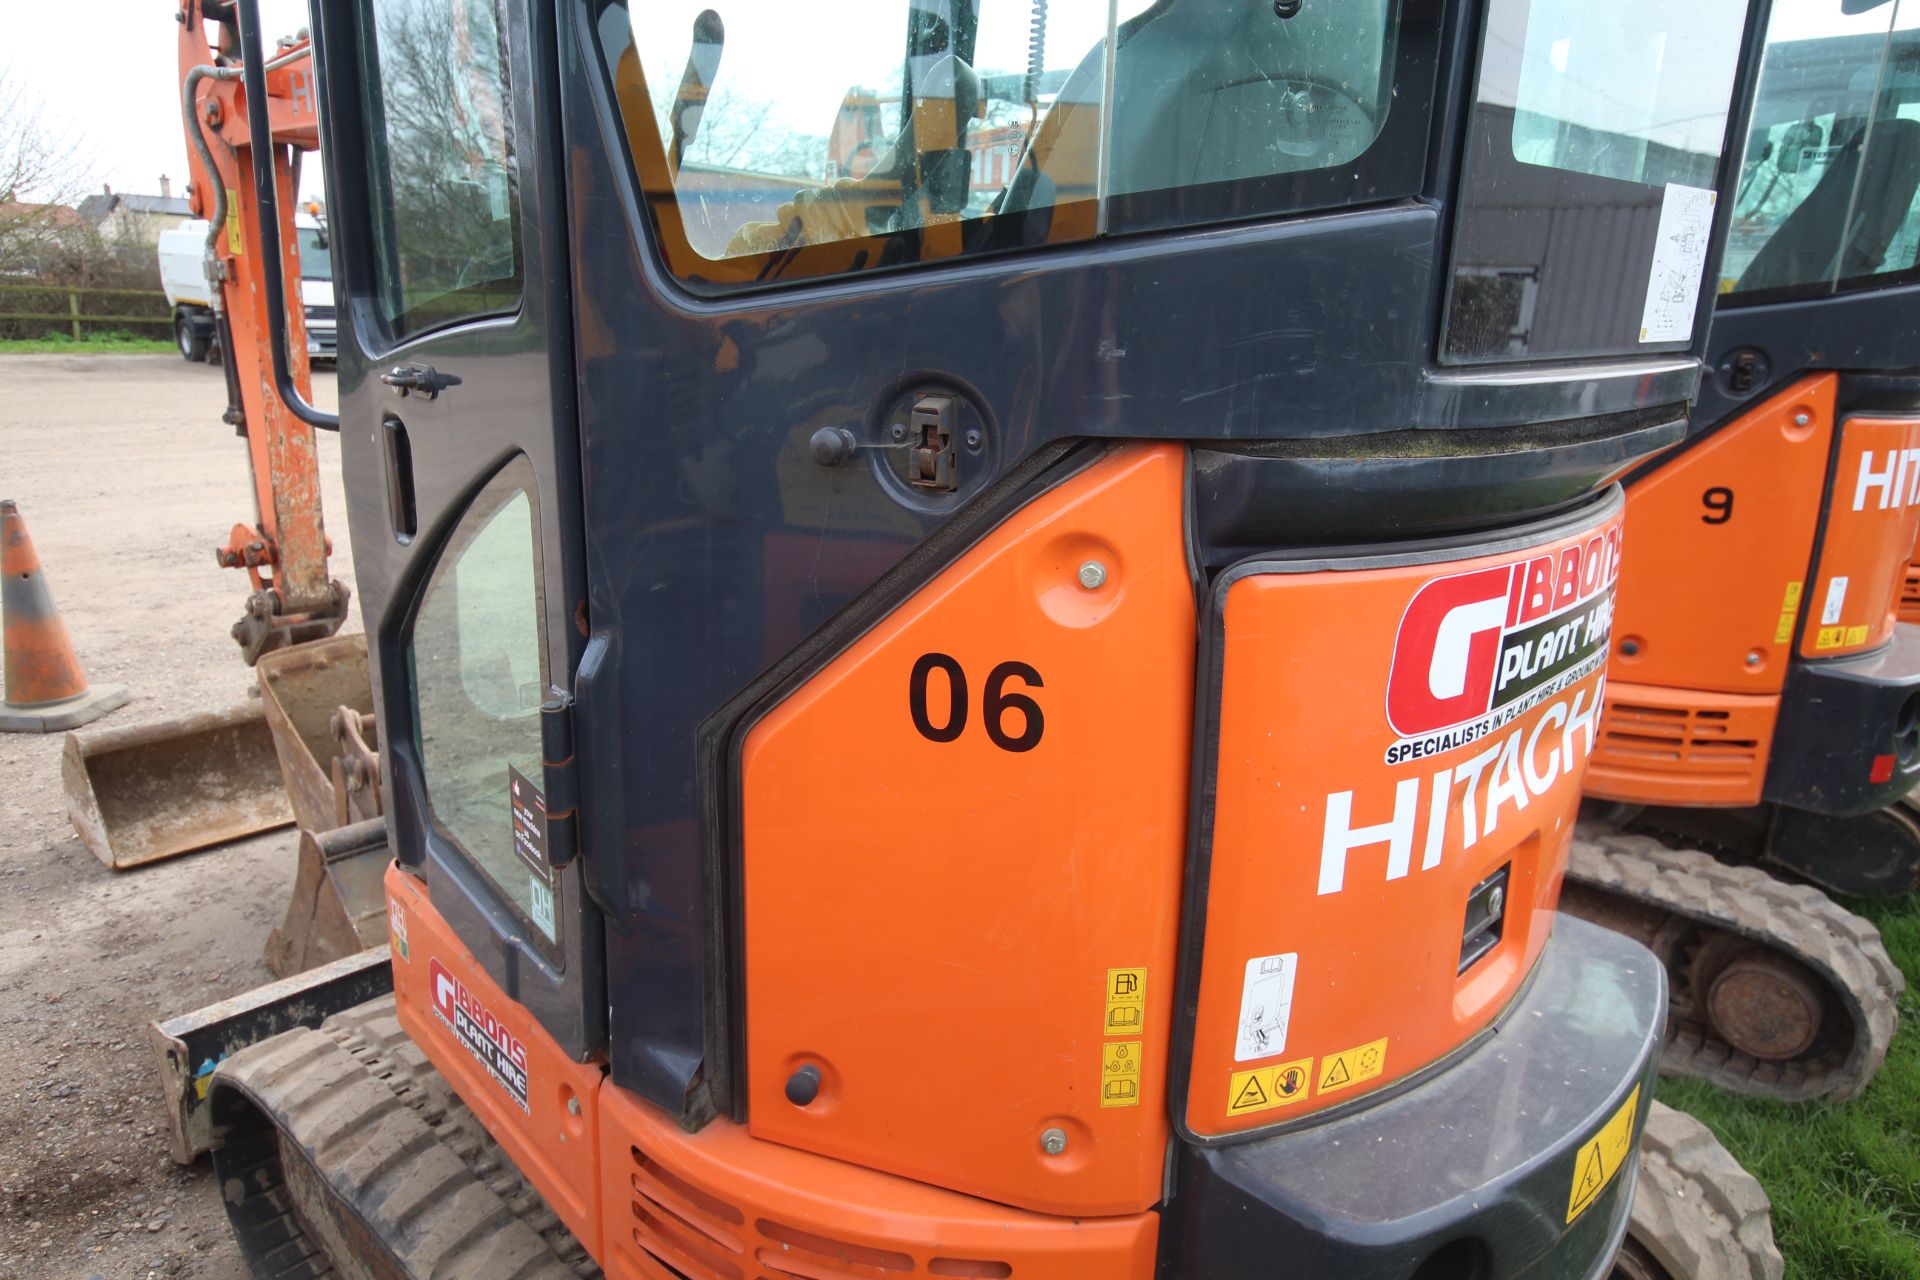 Hitachi Z-Axis 26U-5A CR 2.6T rubber track excavator. 2017. 2,722 hours. Serial number HCM - Image 25 of 58